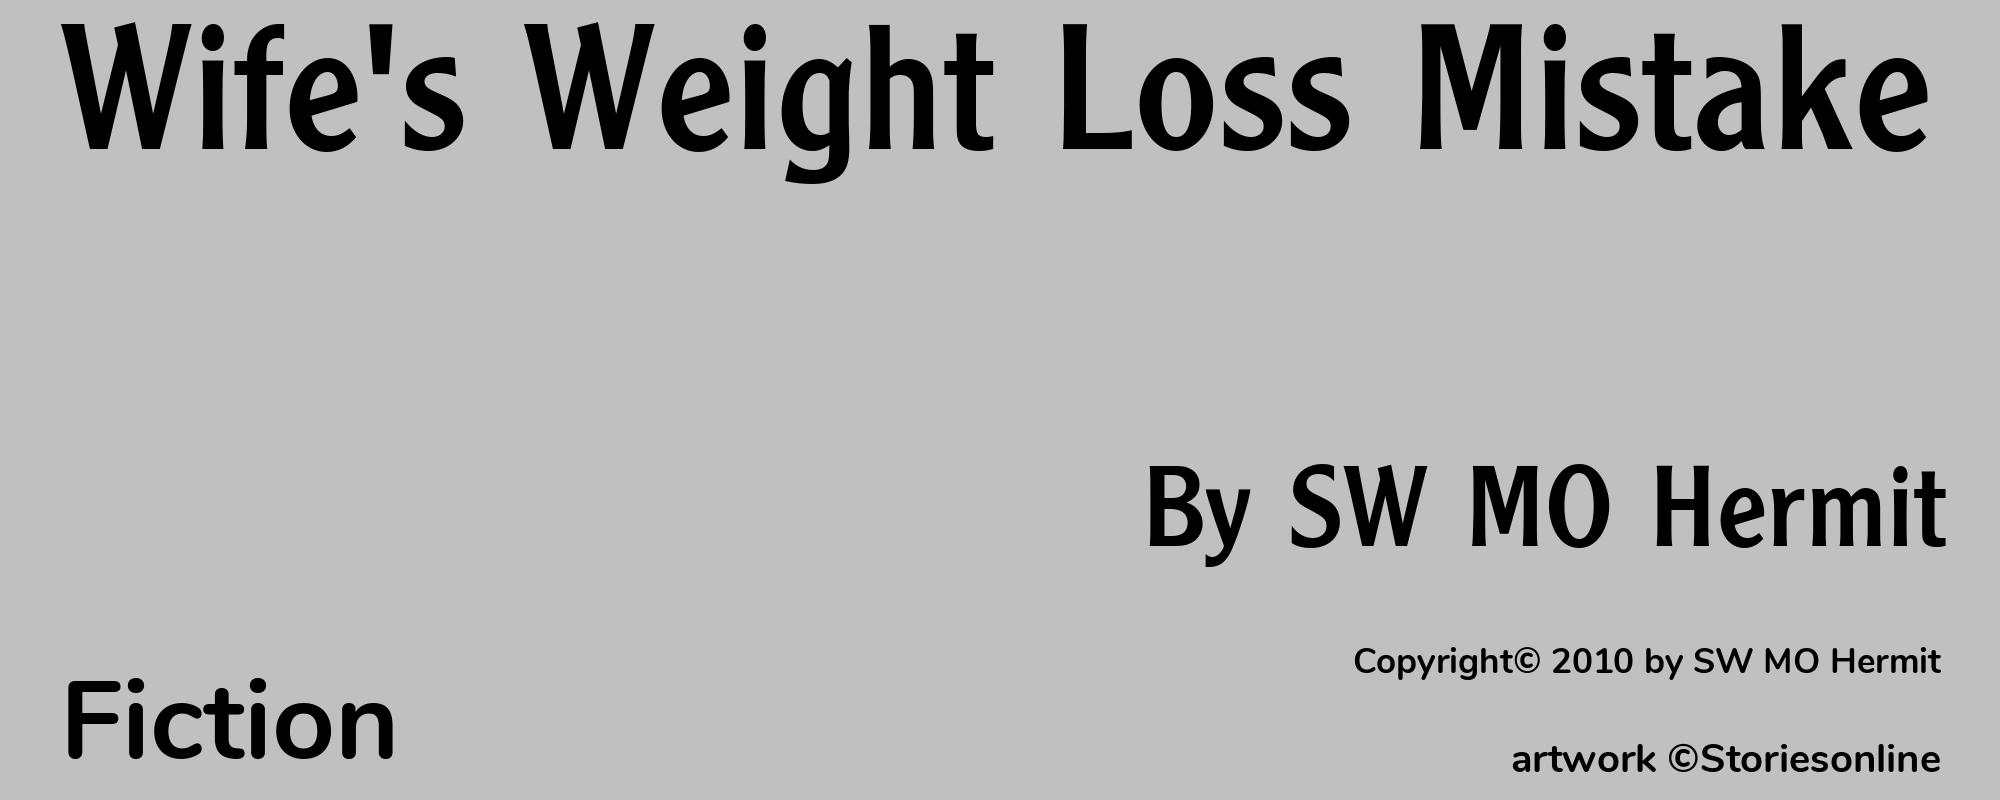 Wife's Weight Loss Mistake - Cover